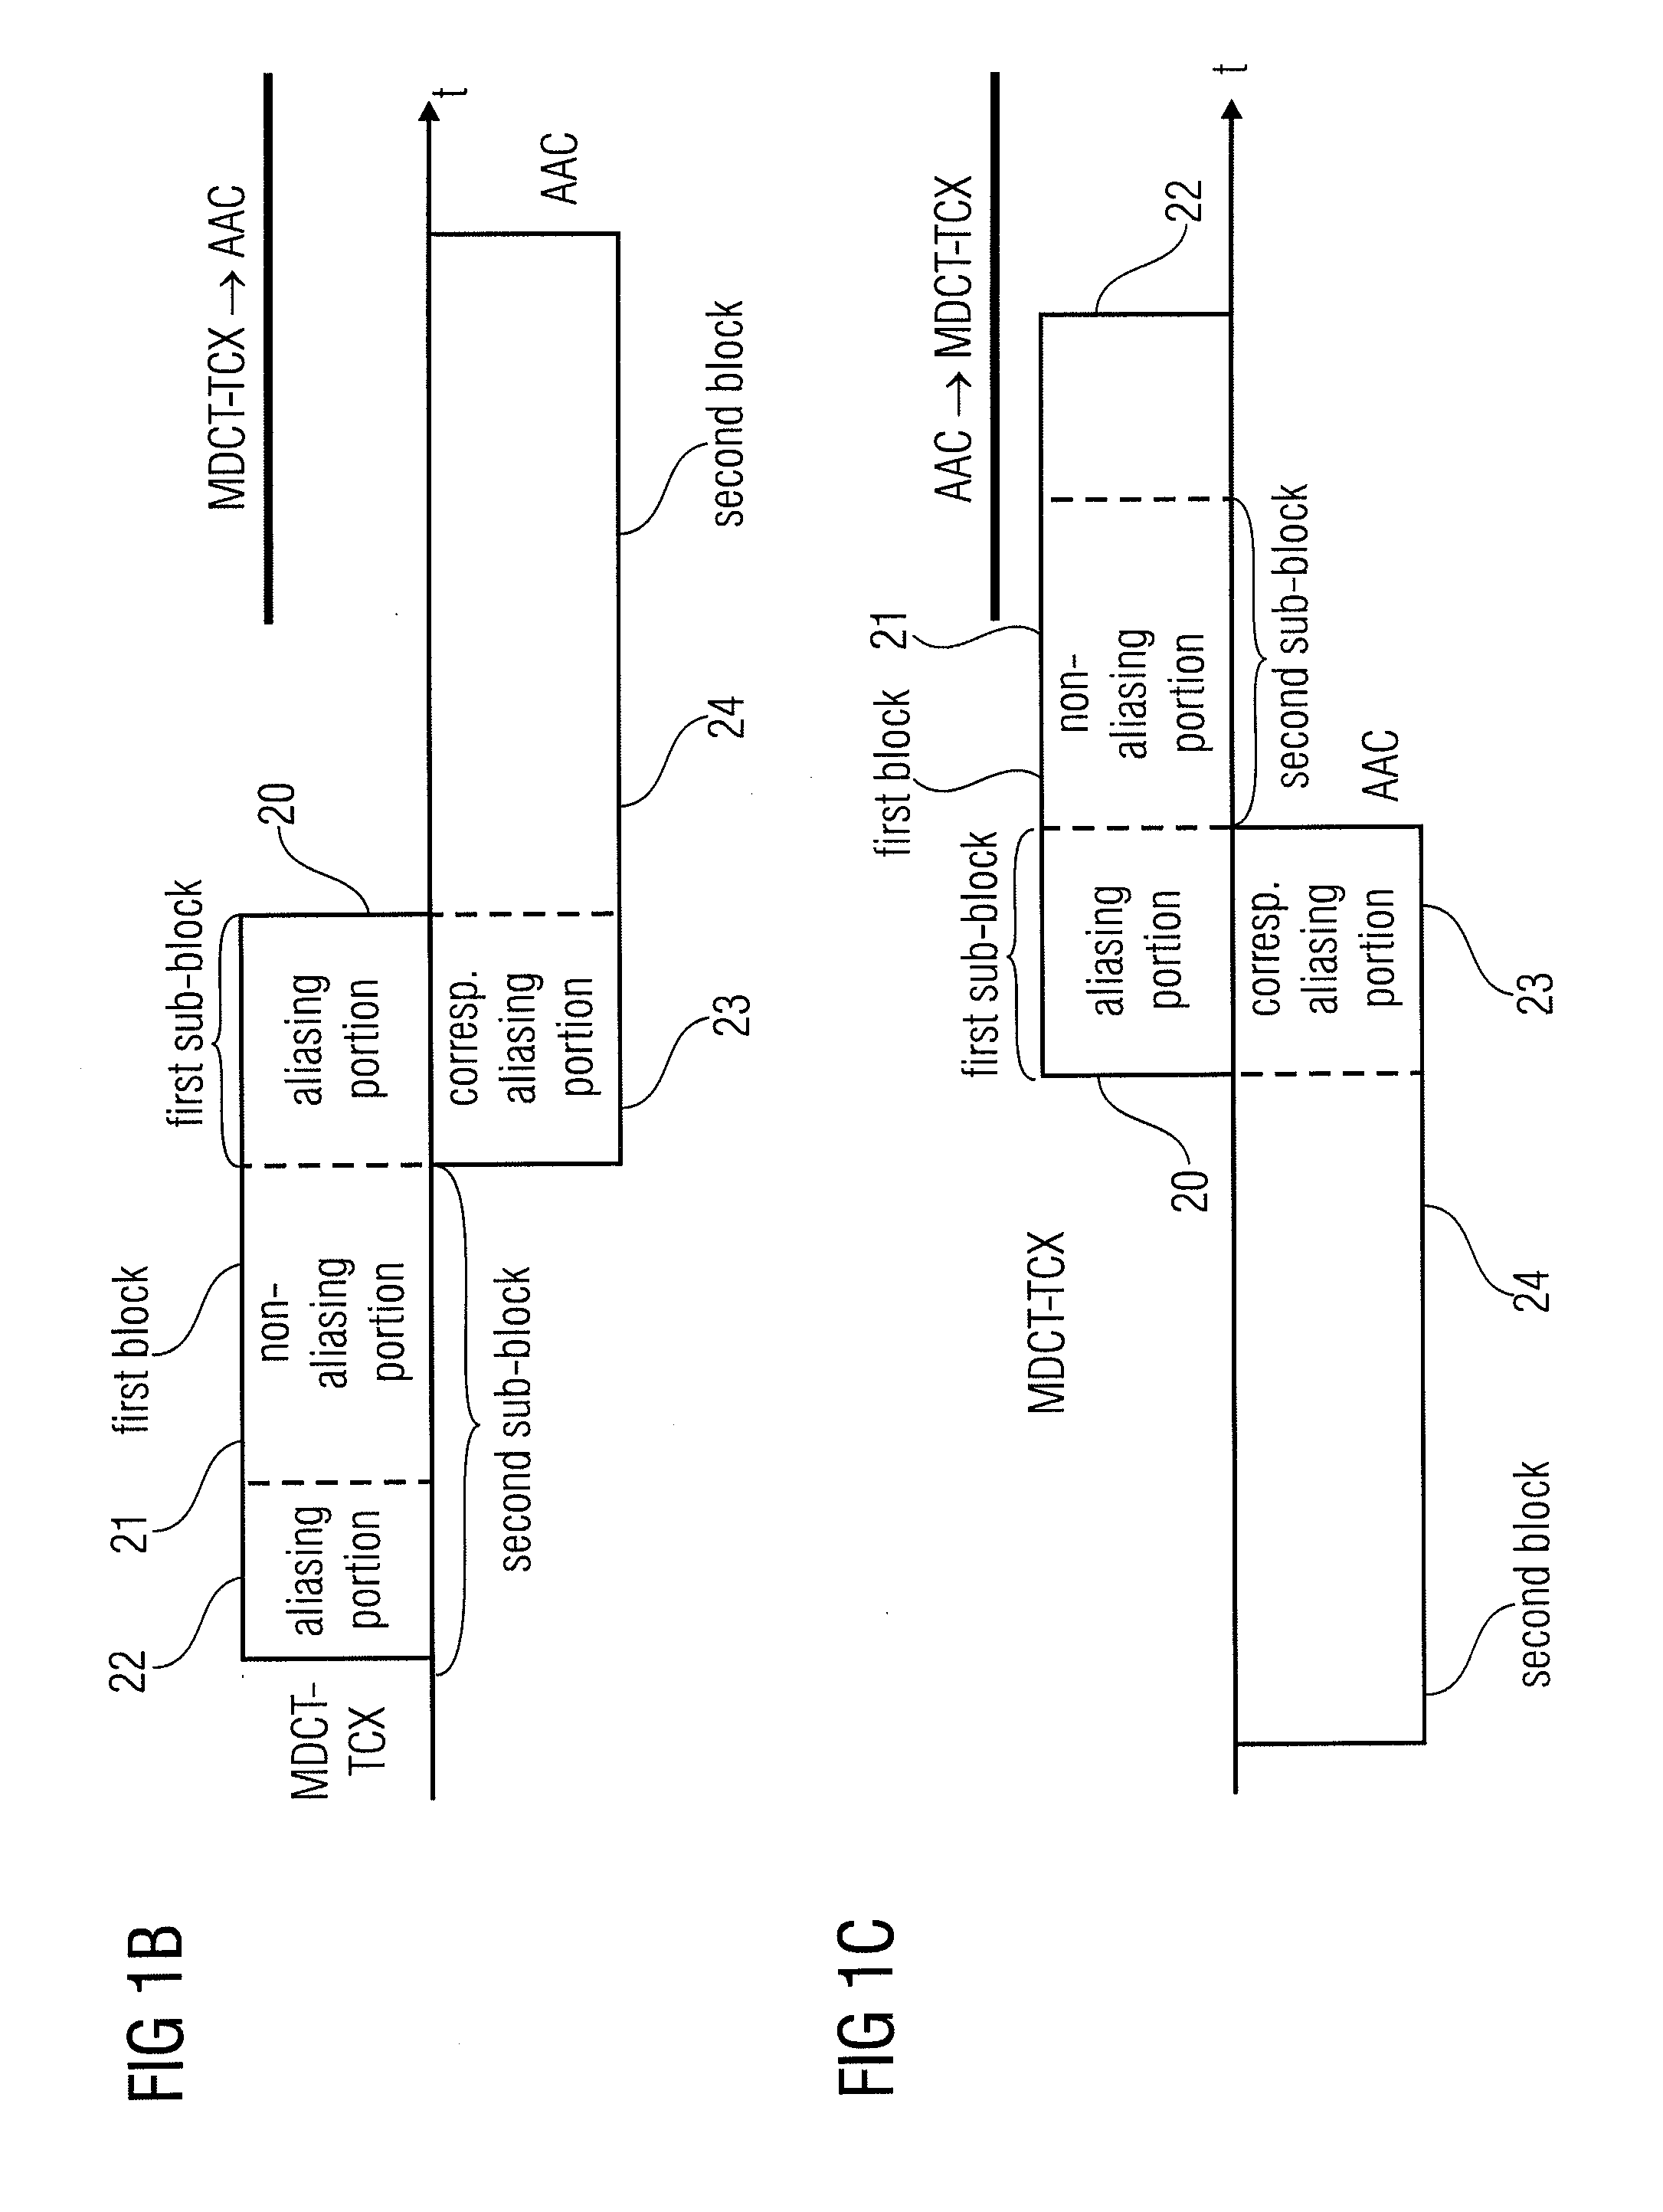 Apparatus and Method for Encoding/Decoding an Audio Signal Using an Aliasing Switch Scheme